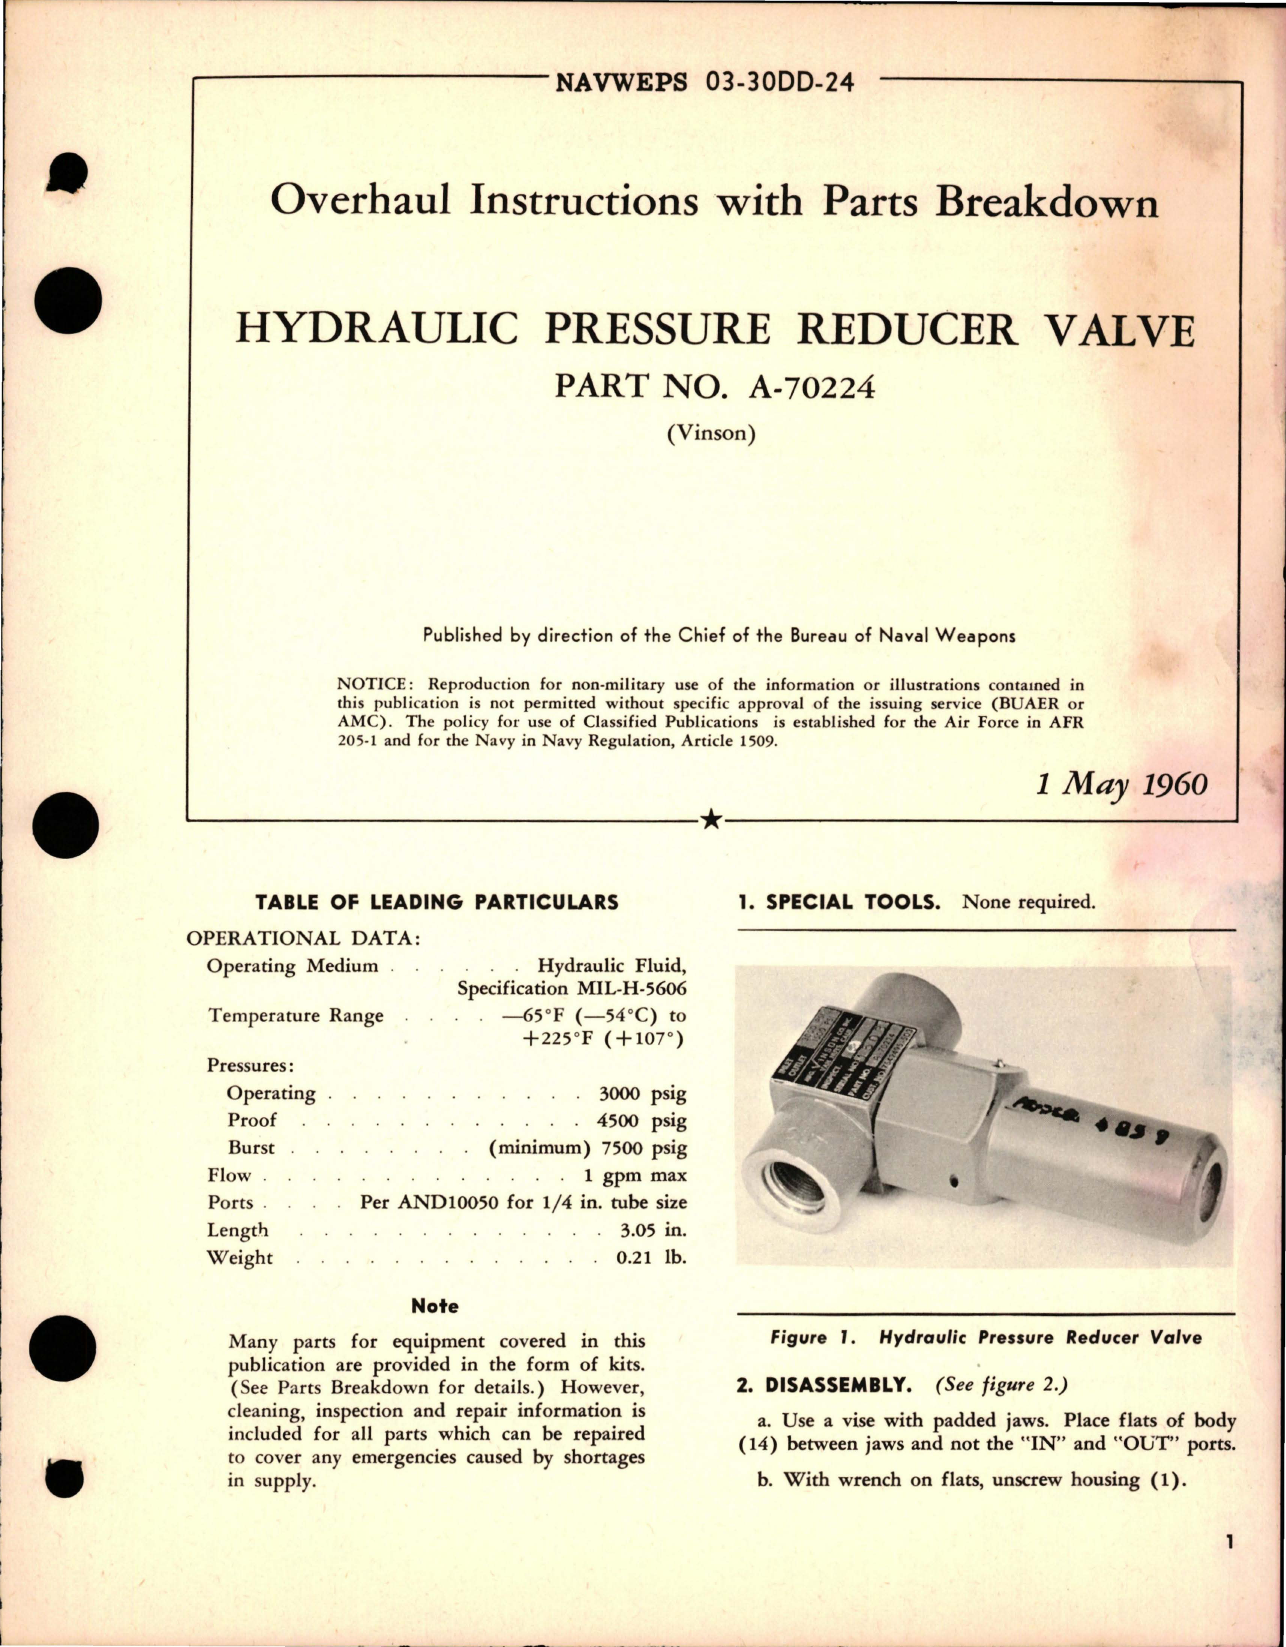 Sample page 1 from AirCorps Library document: Overhaul Instructions with Parts Breakdown for Hydraulic Pressure Reducer Valve - Part A-70224